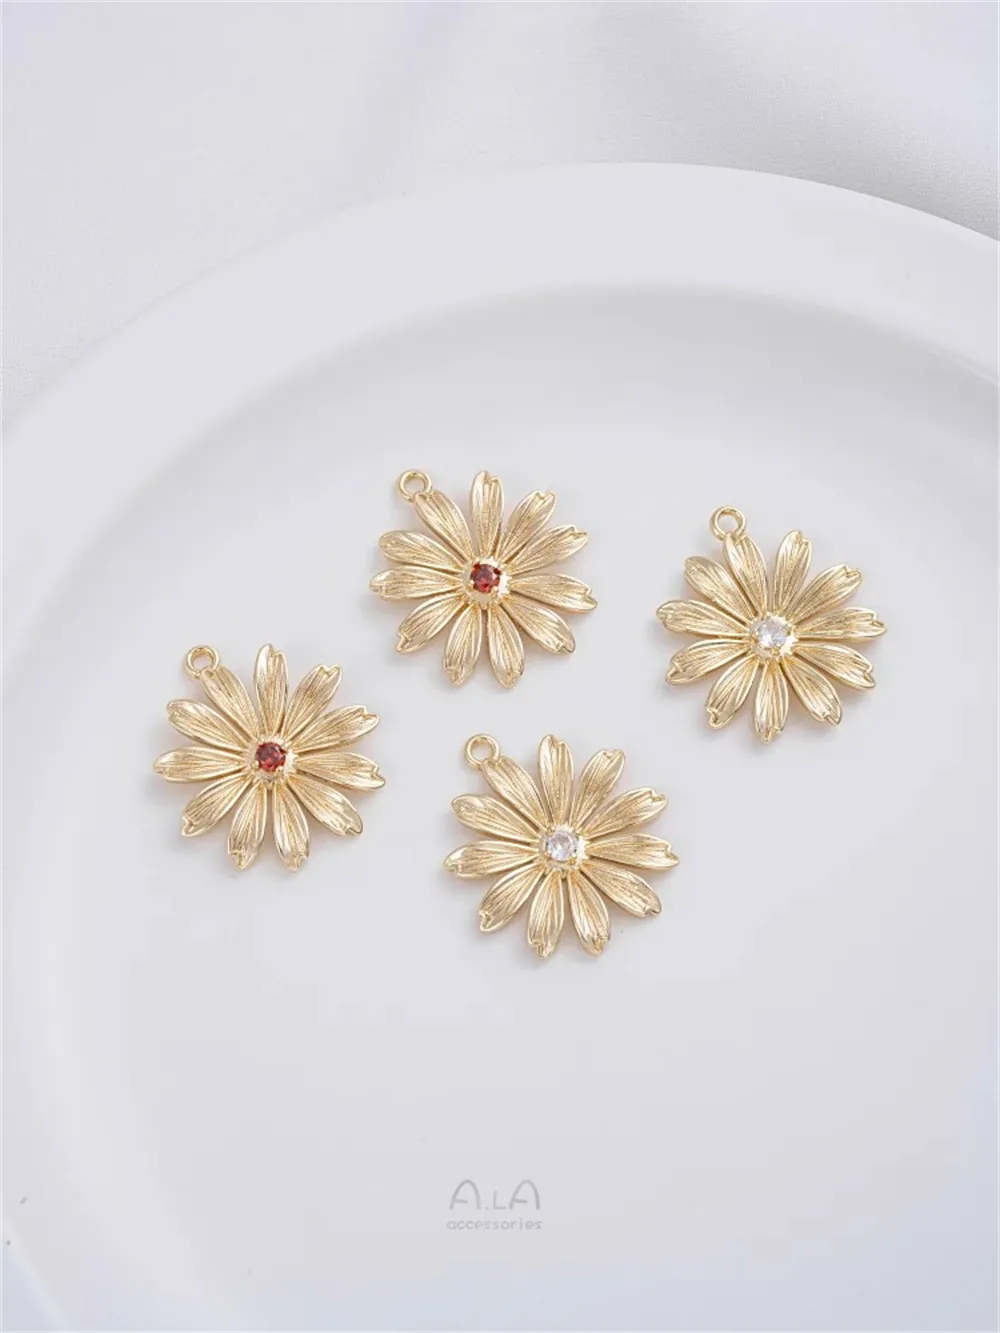 14K Wrapped Gold Daisy Flower Pendant Handmade String Pearl Necklace Pendant Diy Earrings Jewelry Charms Pendant K566 gufeather me22 jewelry accessories 18k gold plated plastic pearl zircons hand made jewelry making charms diy pendants 4pcs lot